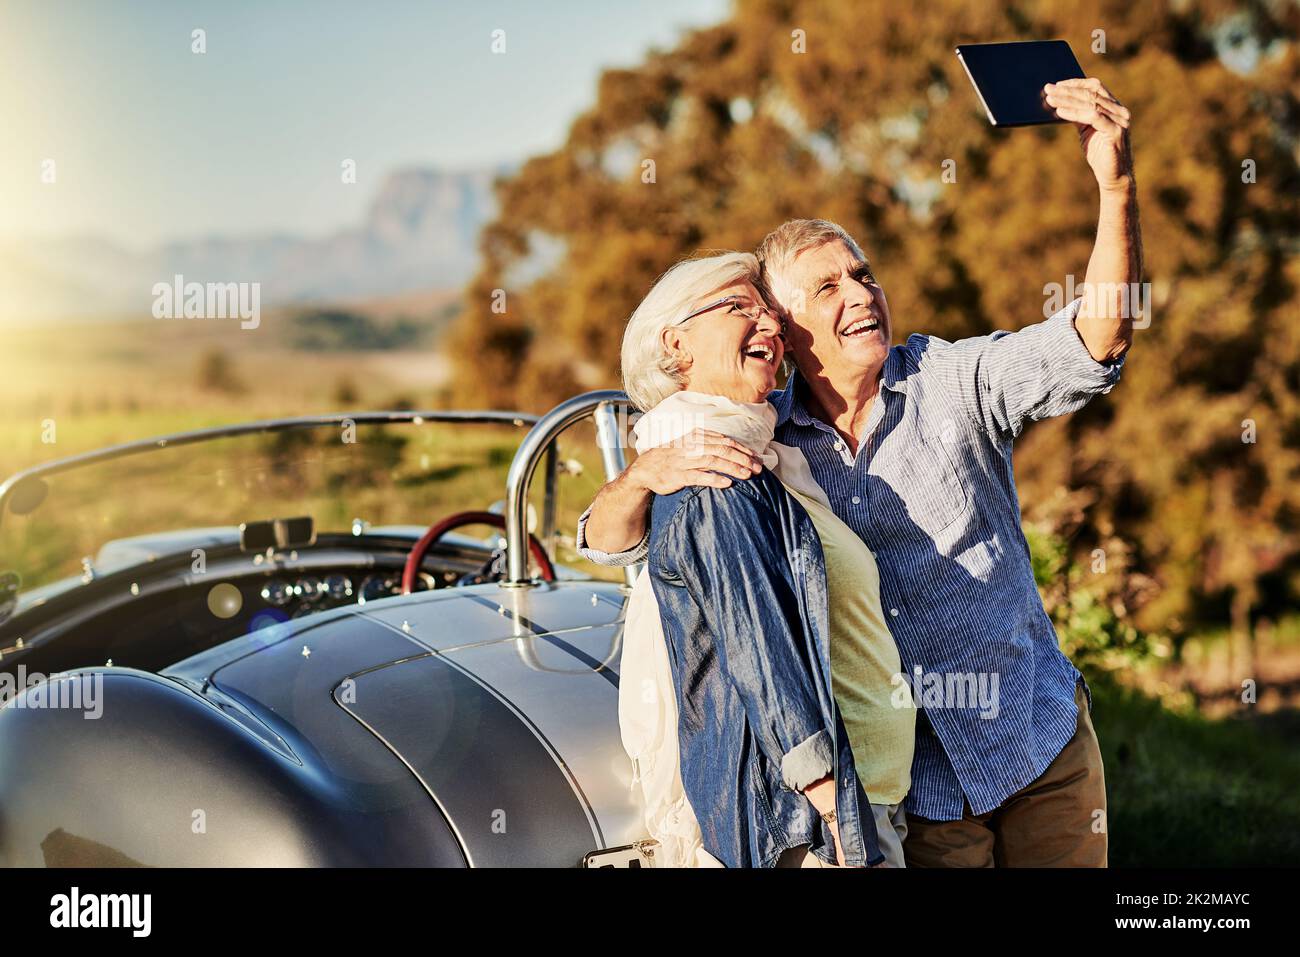 Taking a selfie for the grandkids. Shot of a senior couple posing for a selfie while out on a roadtrip in a convertible. Stock Photo